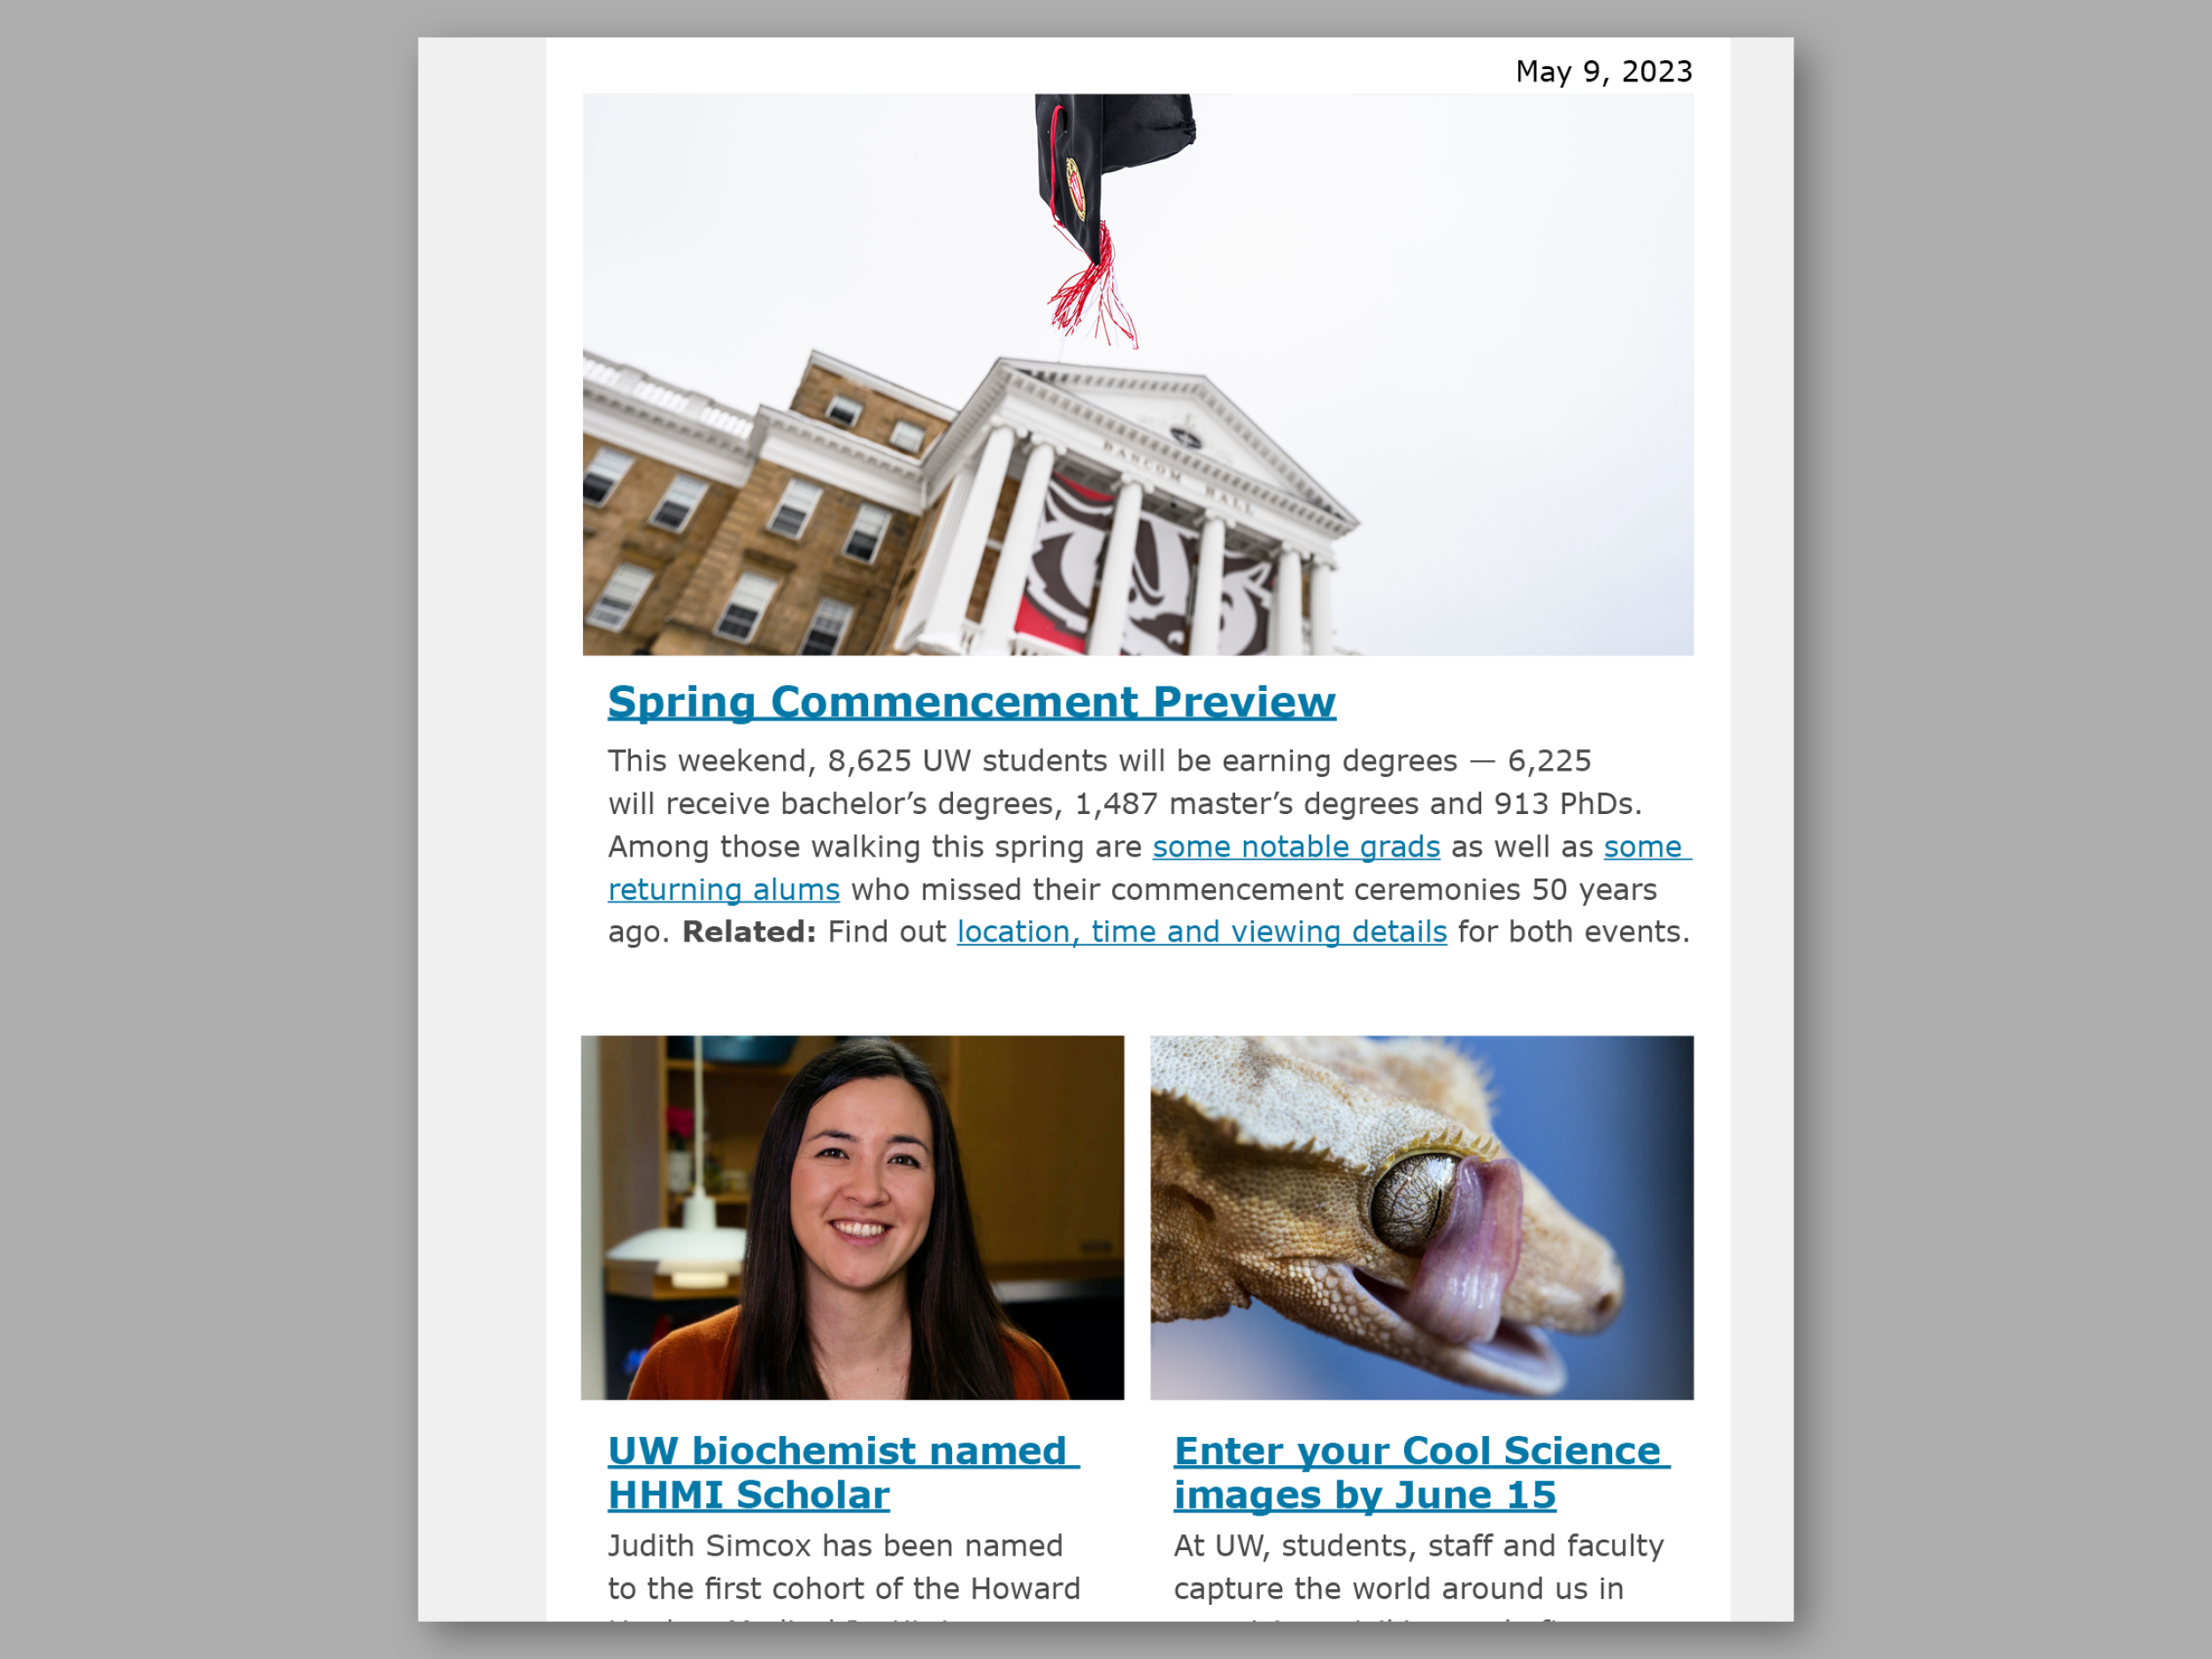 An e-newsletter body featuring three content areas each containing an image, linked header, and copy